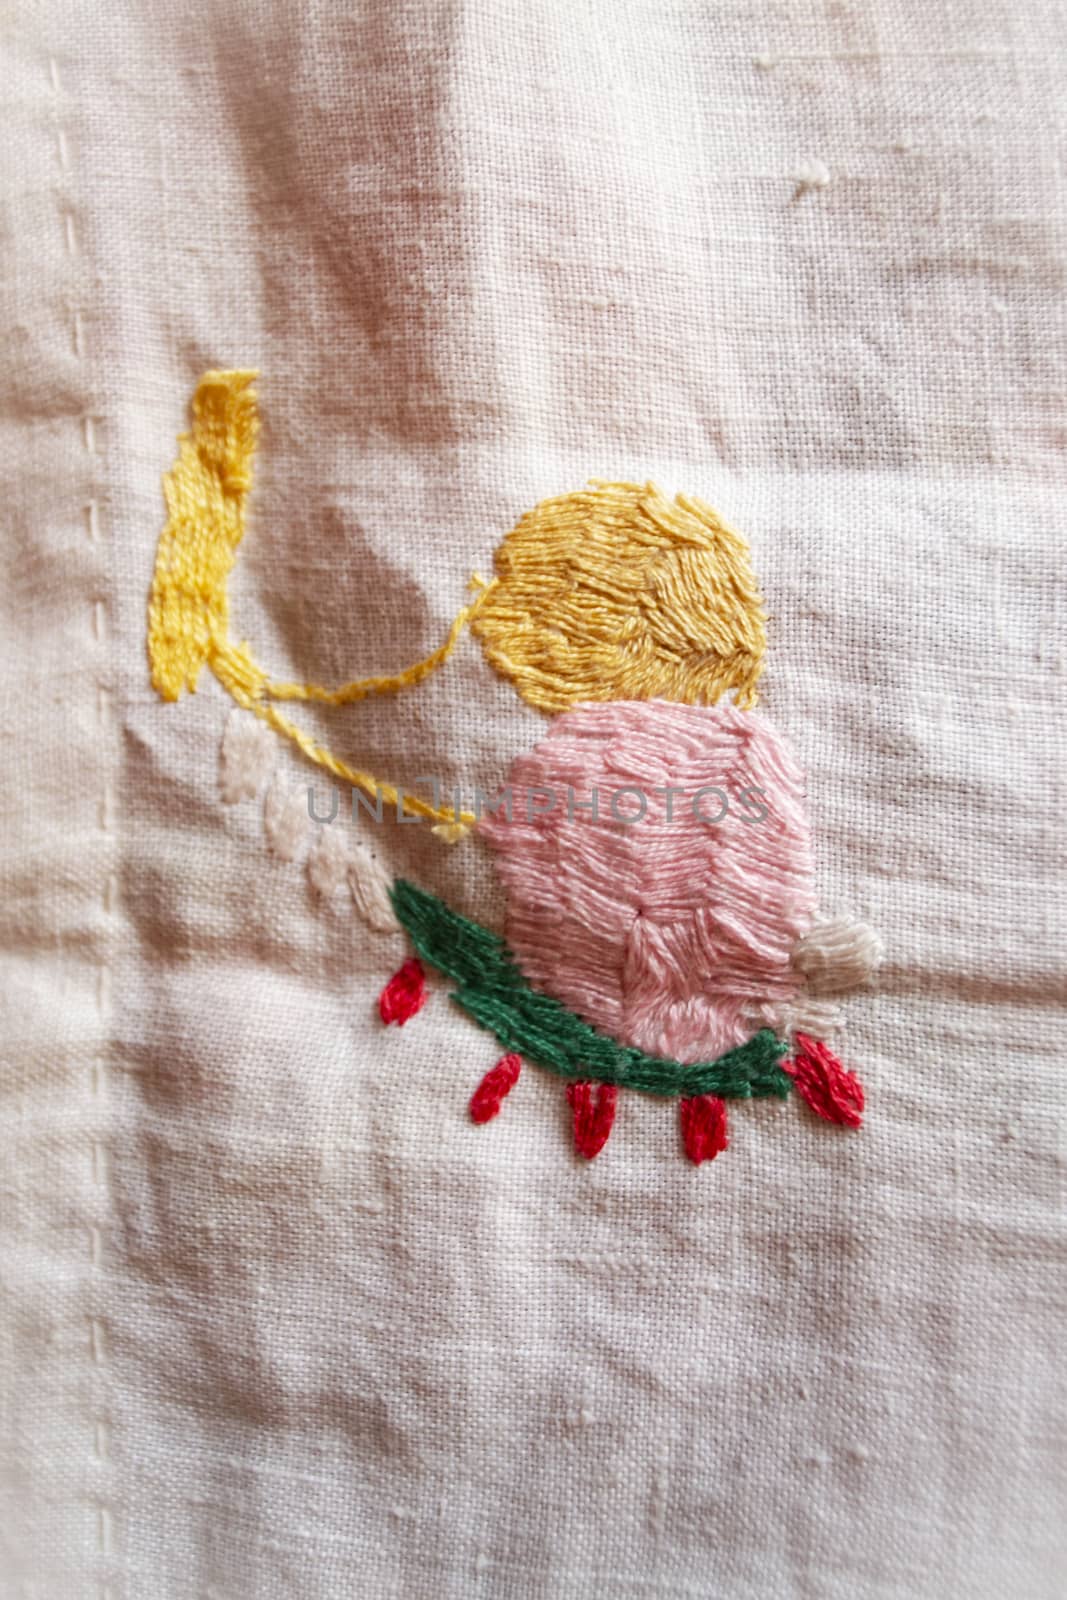 fruit hand made embroidered smooth decoration on white fabric , vintage folk embroidery in Belarus, second half of 19 century